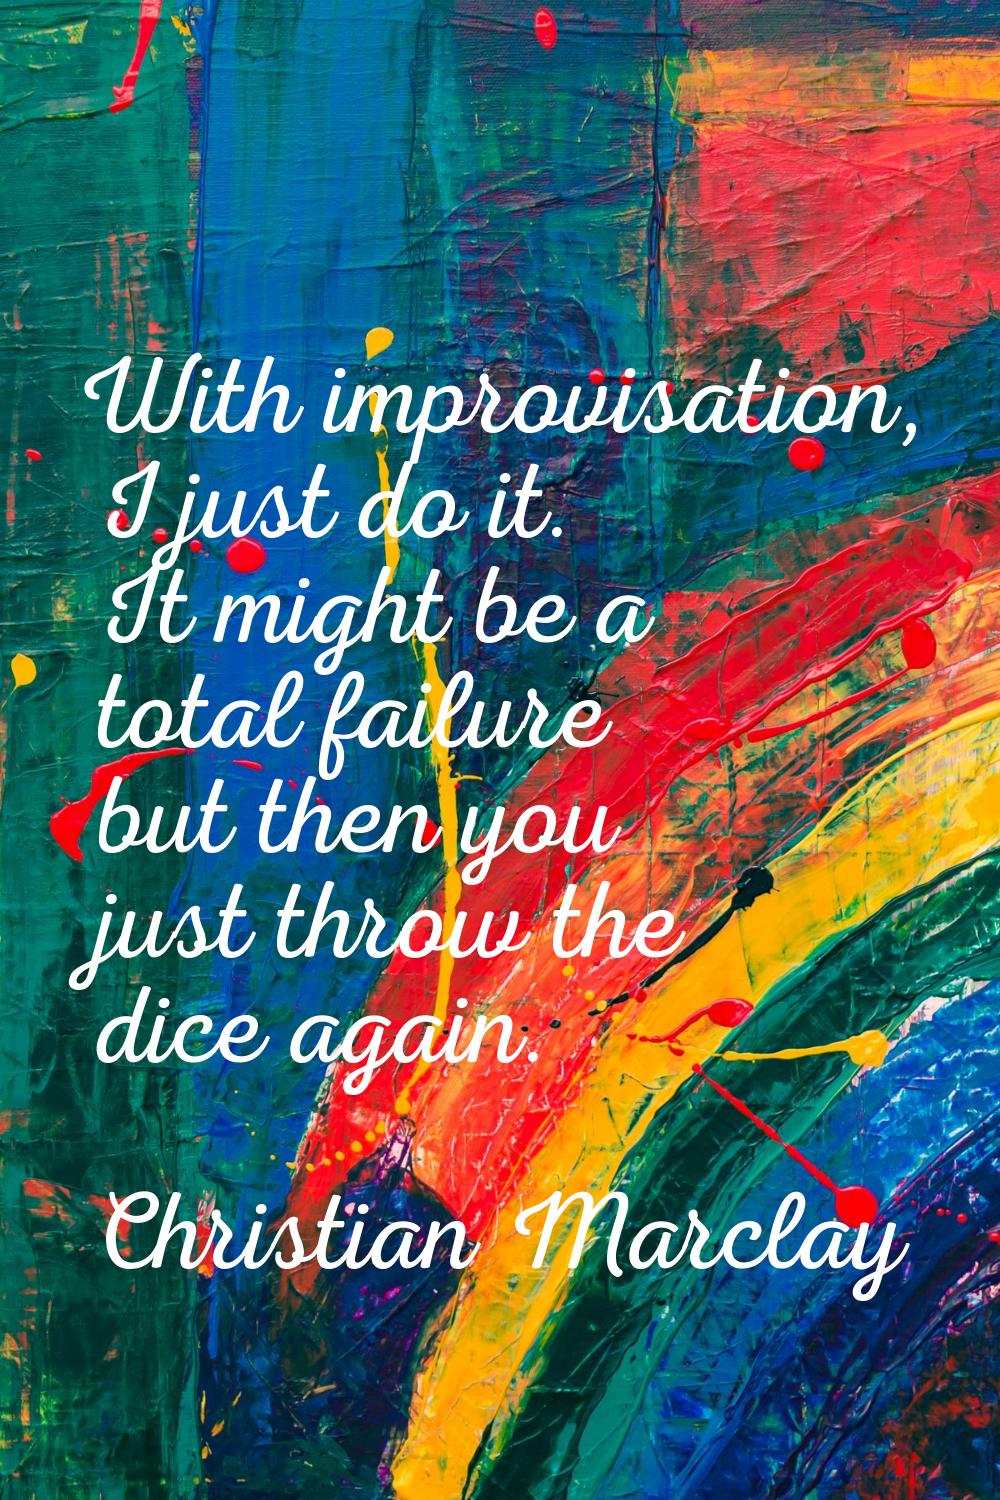 With improvisation, I just do it. It might be a total failure but then you just throw the dice agai